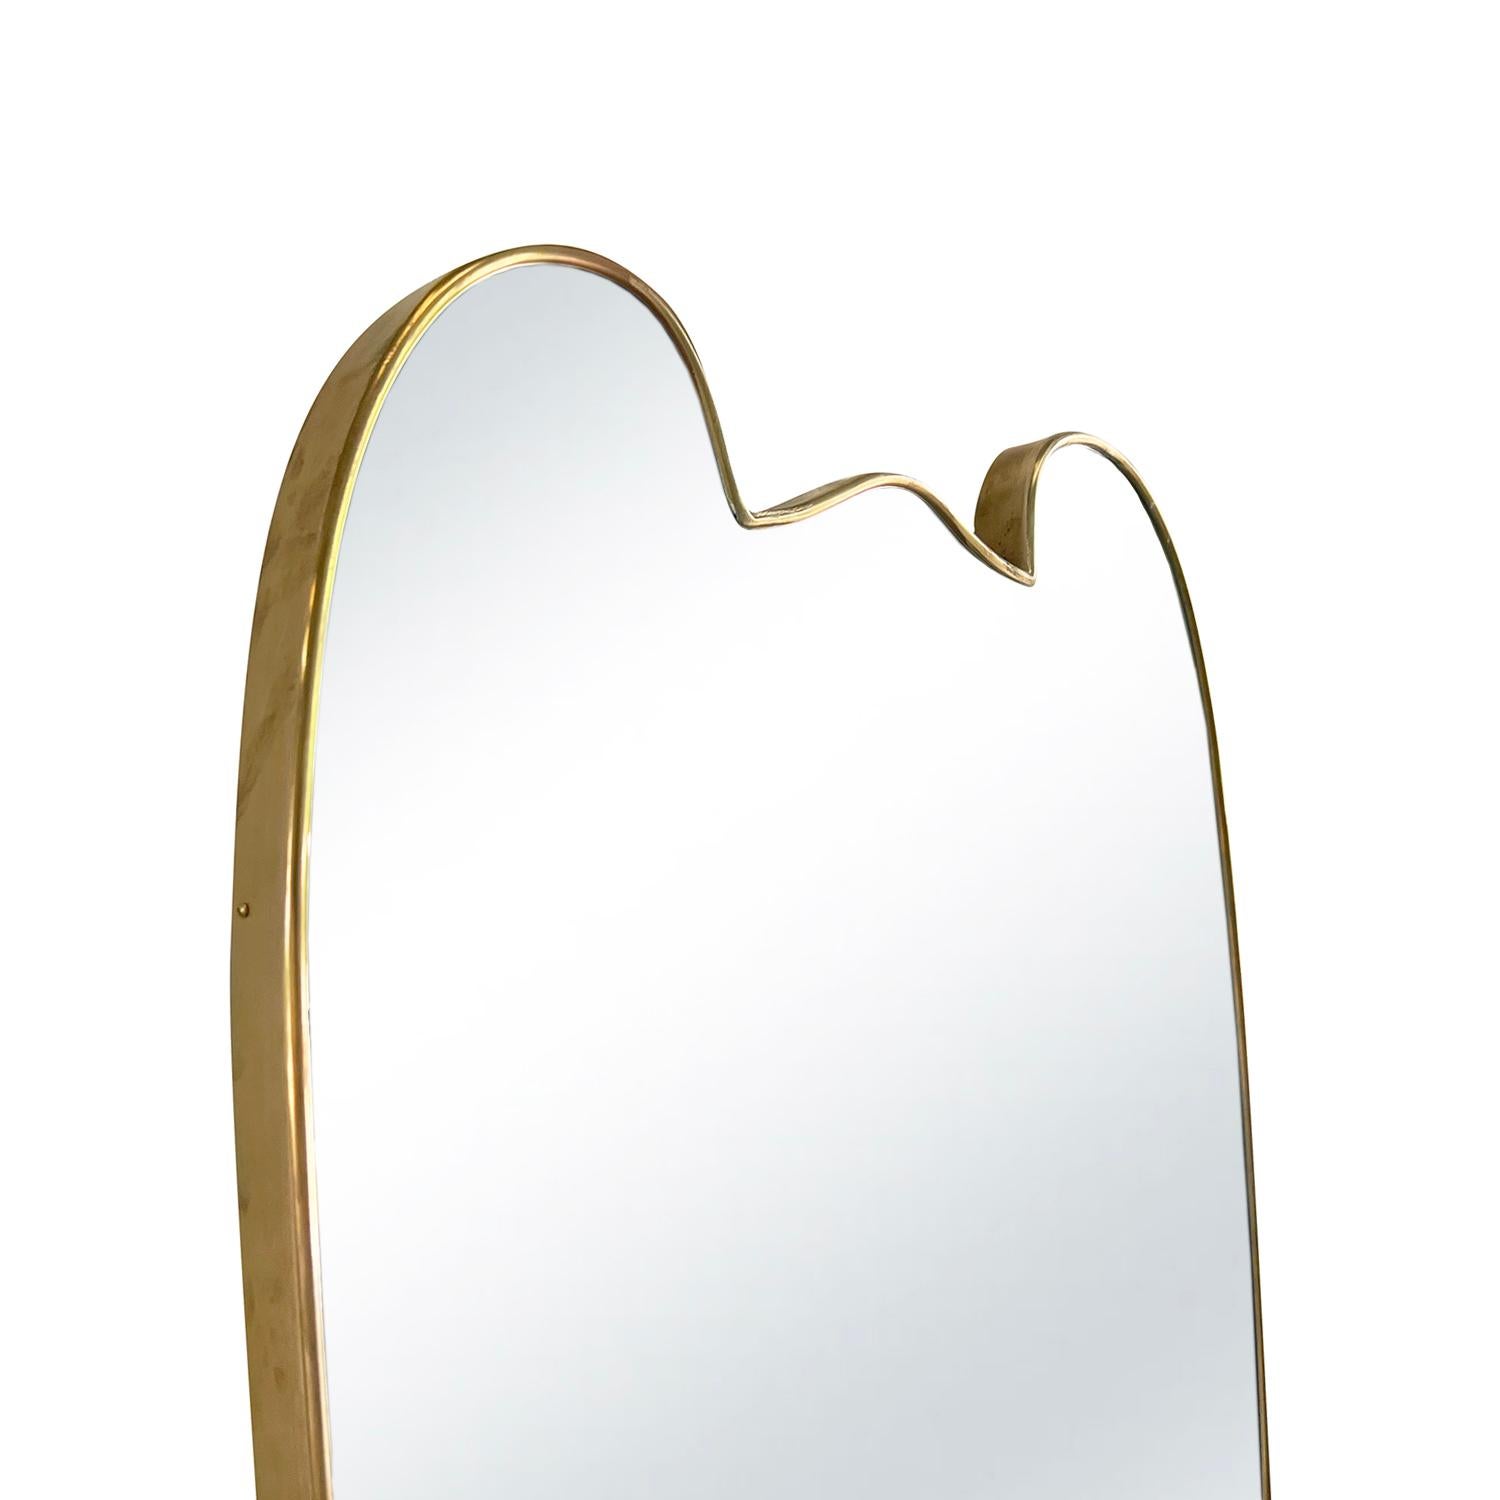 Polished 20th Century Italian Mid-Century Modernist Vintage Oval Brass Wall Glass Mirror For Sale